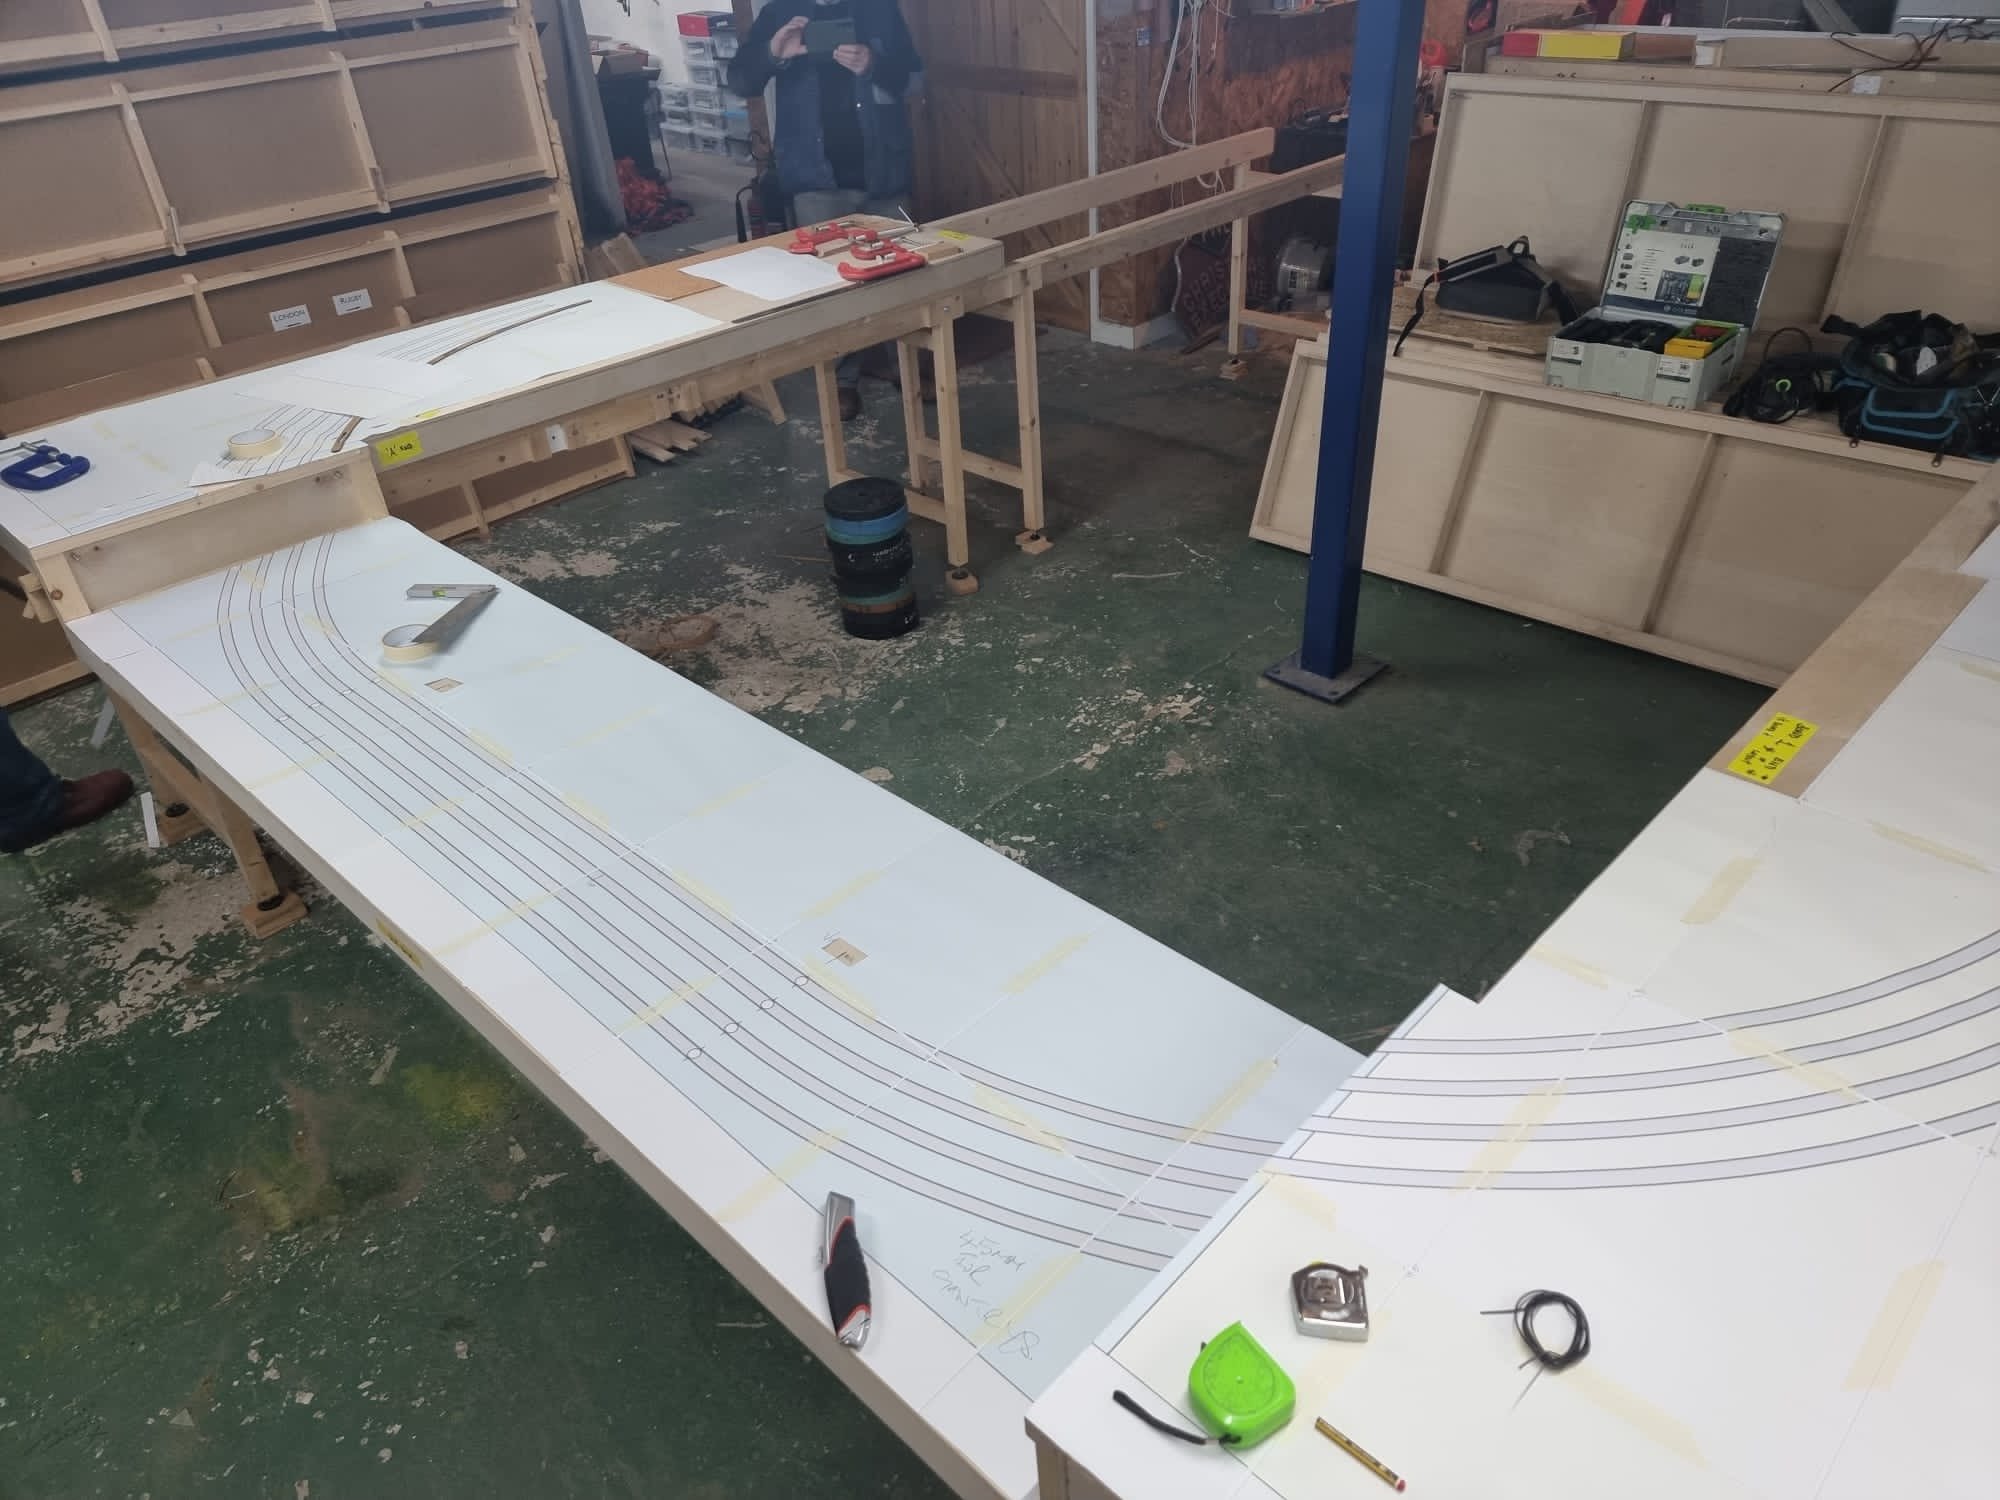 The Railnuts are working on creation of lower end boards which will take the scenery around one end of the Making Tracks layout to model Bushey Viaduct on the approach to the station.